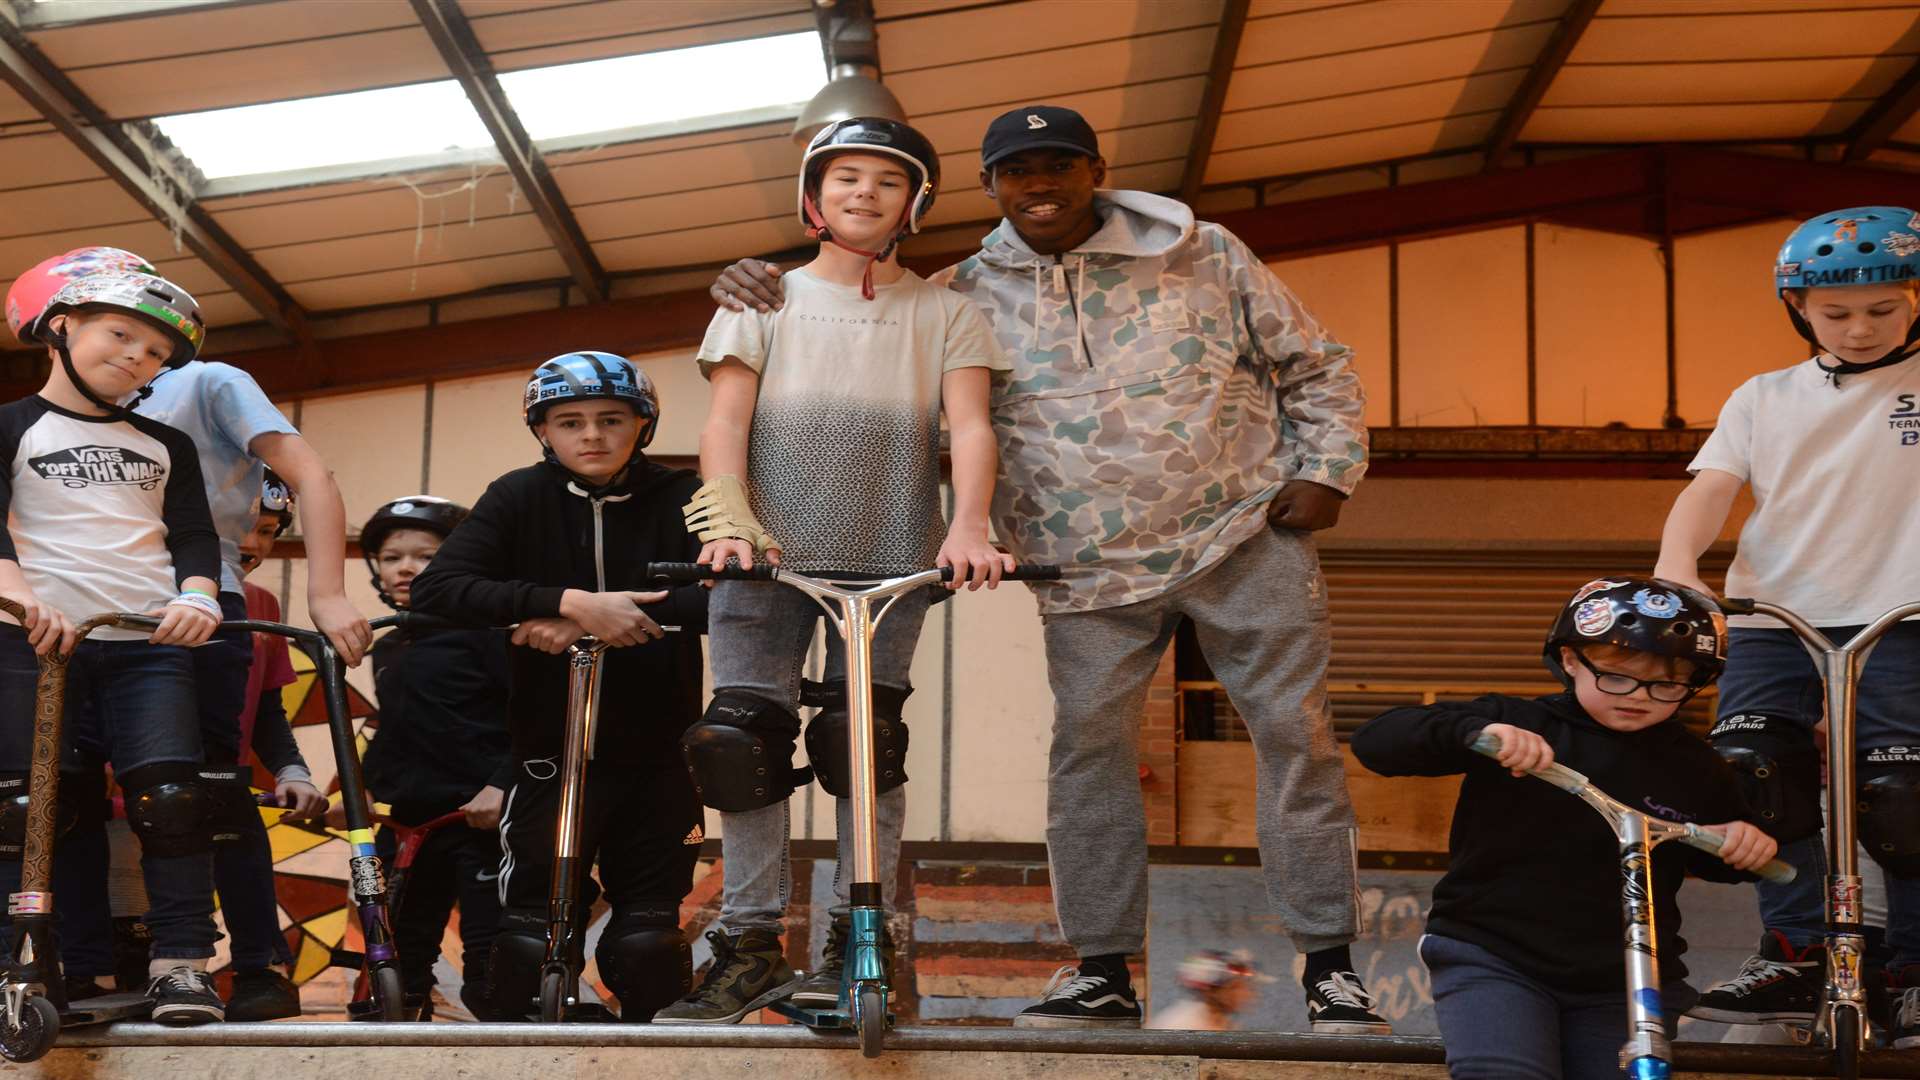 Medway Messenger Charity of the Year - Unit 1 Skatepark1920 x 1080